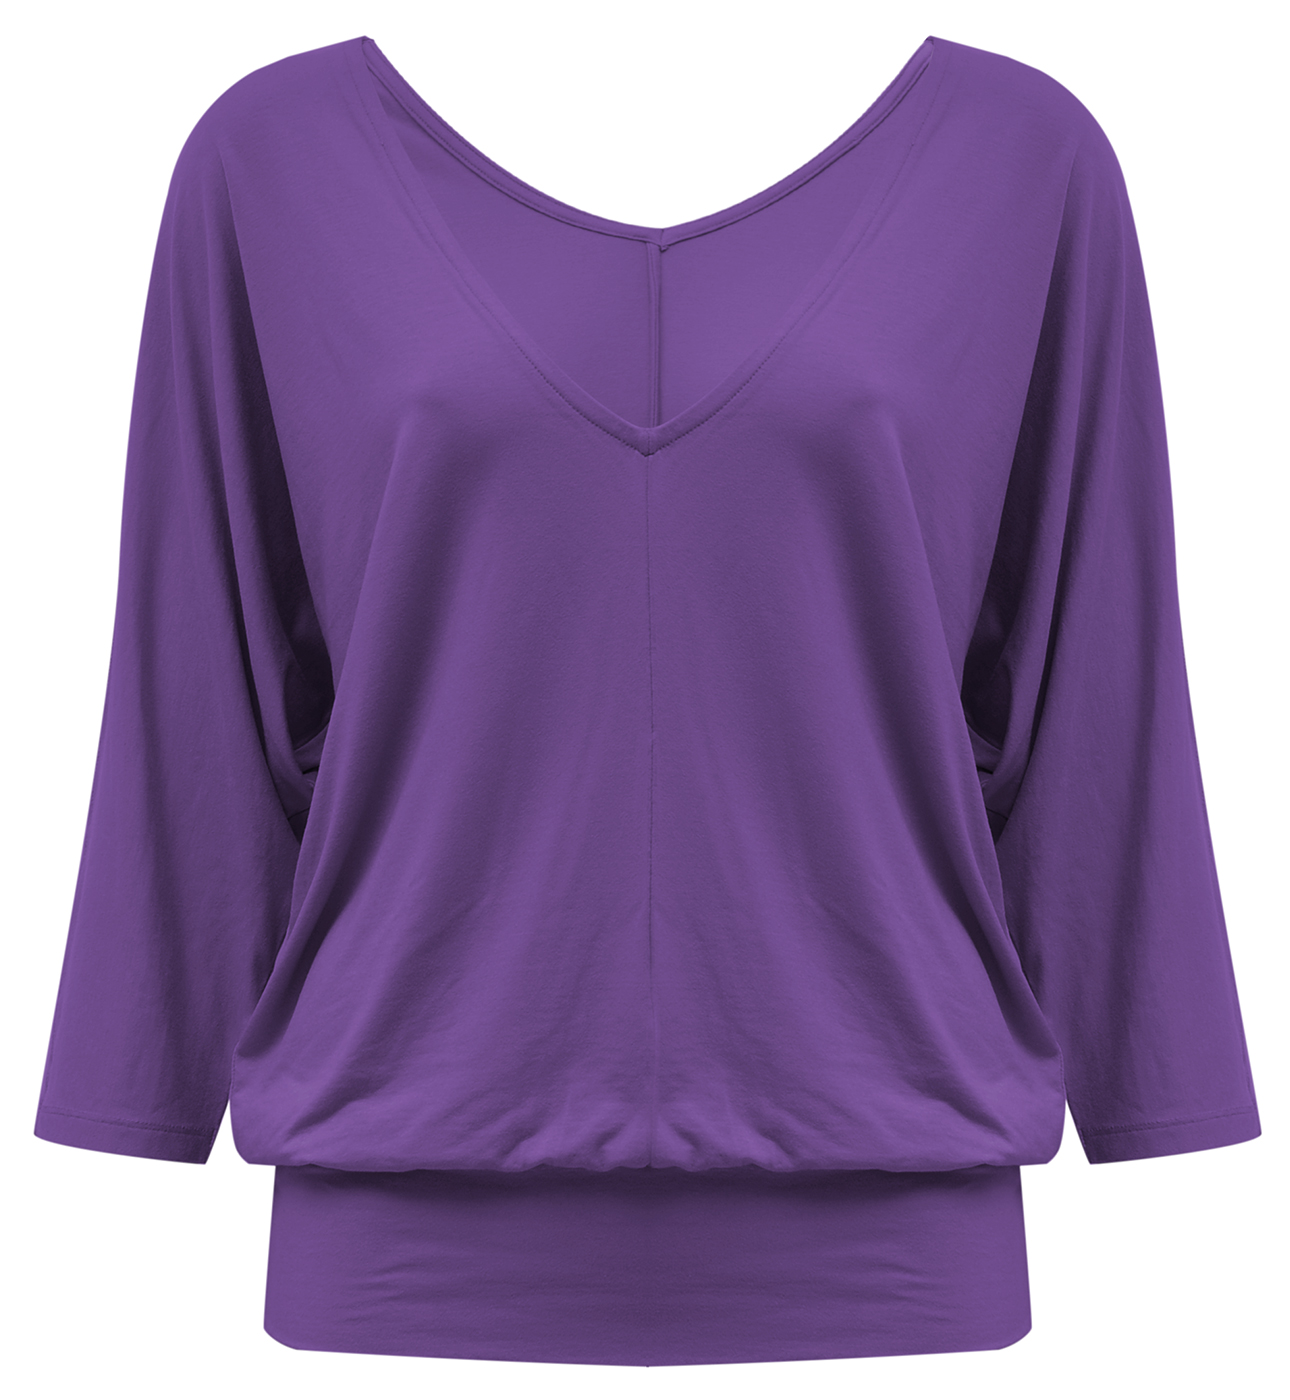 https://www.yogistar.com/out/pictures/master/product/1/saravati_violet_front_web1400.jpg